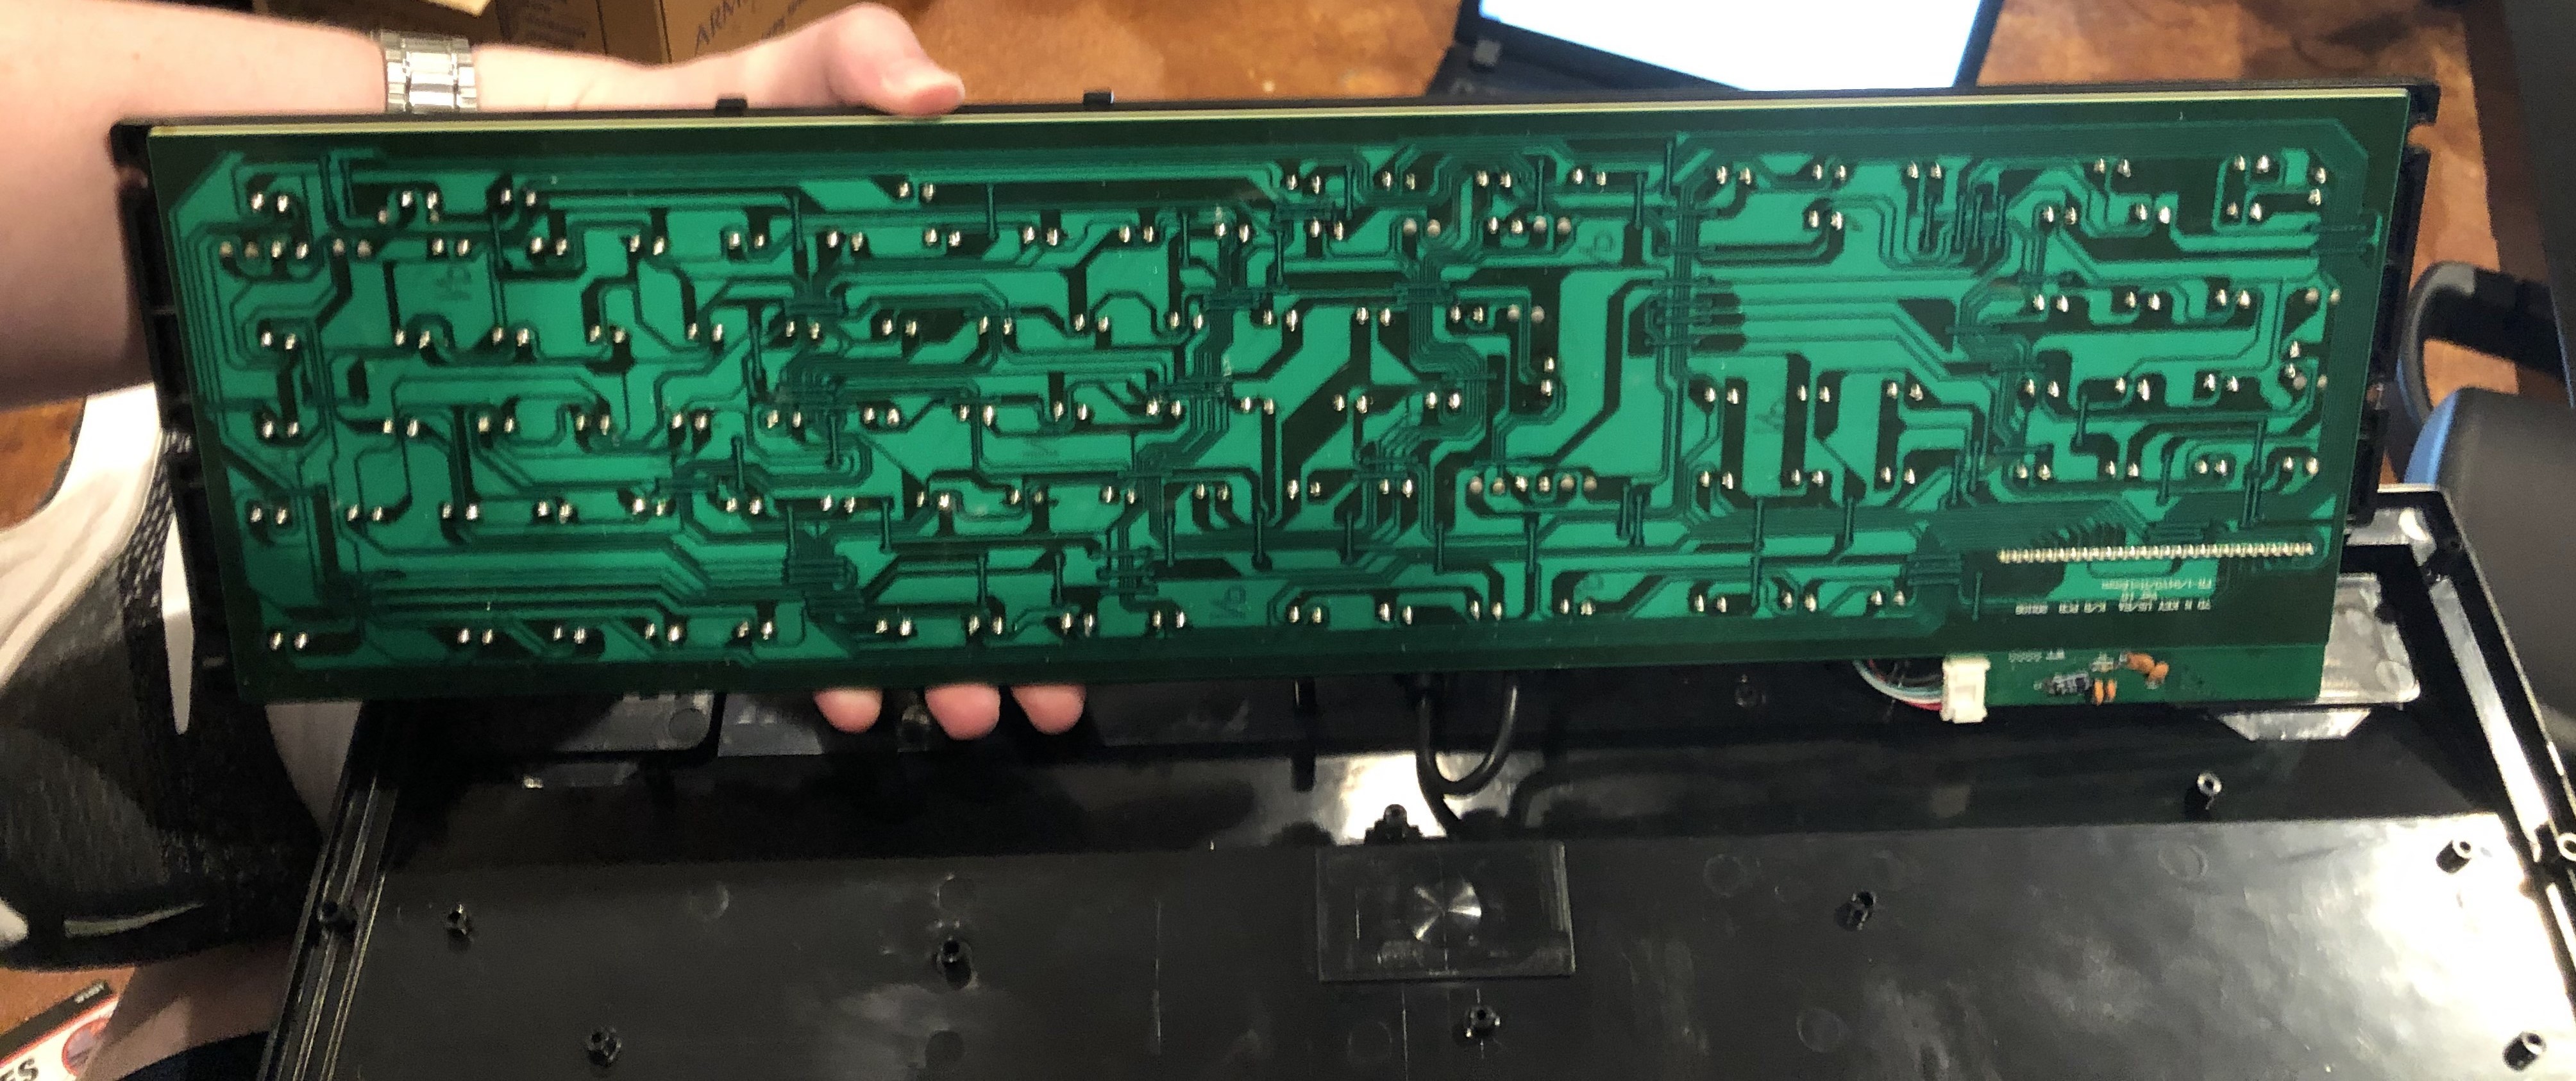 Underside of the board, please excuse some of the crappy solder joints